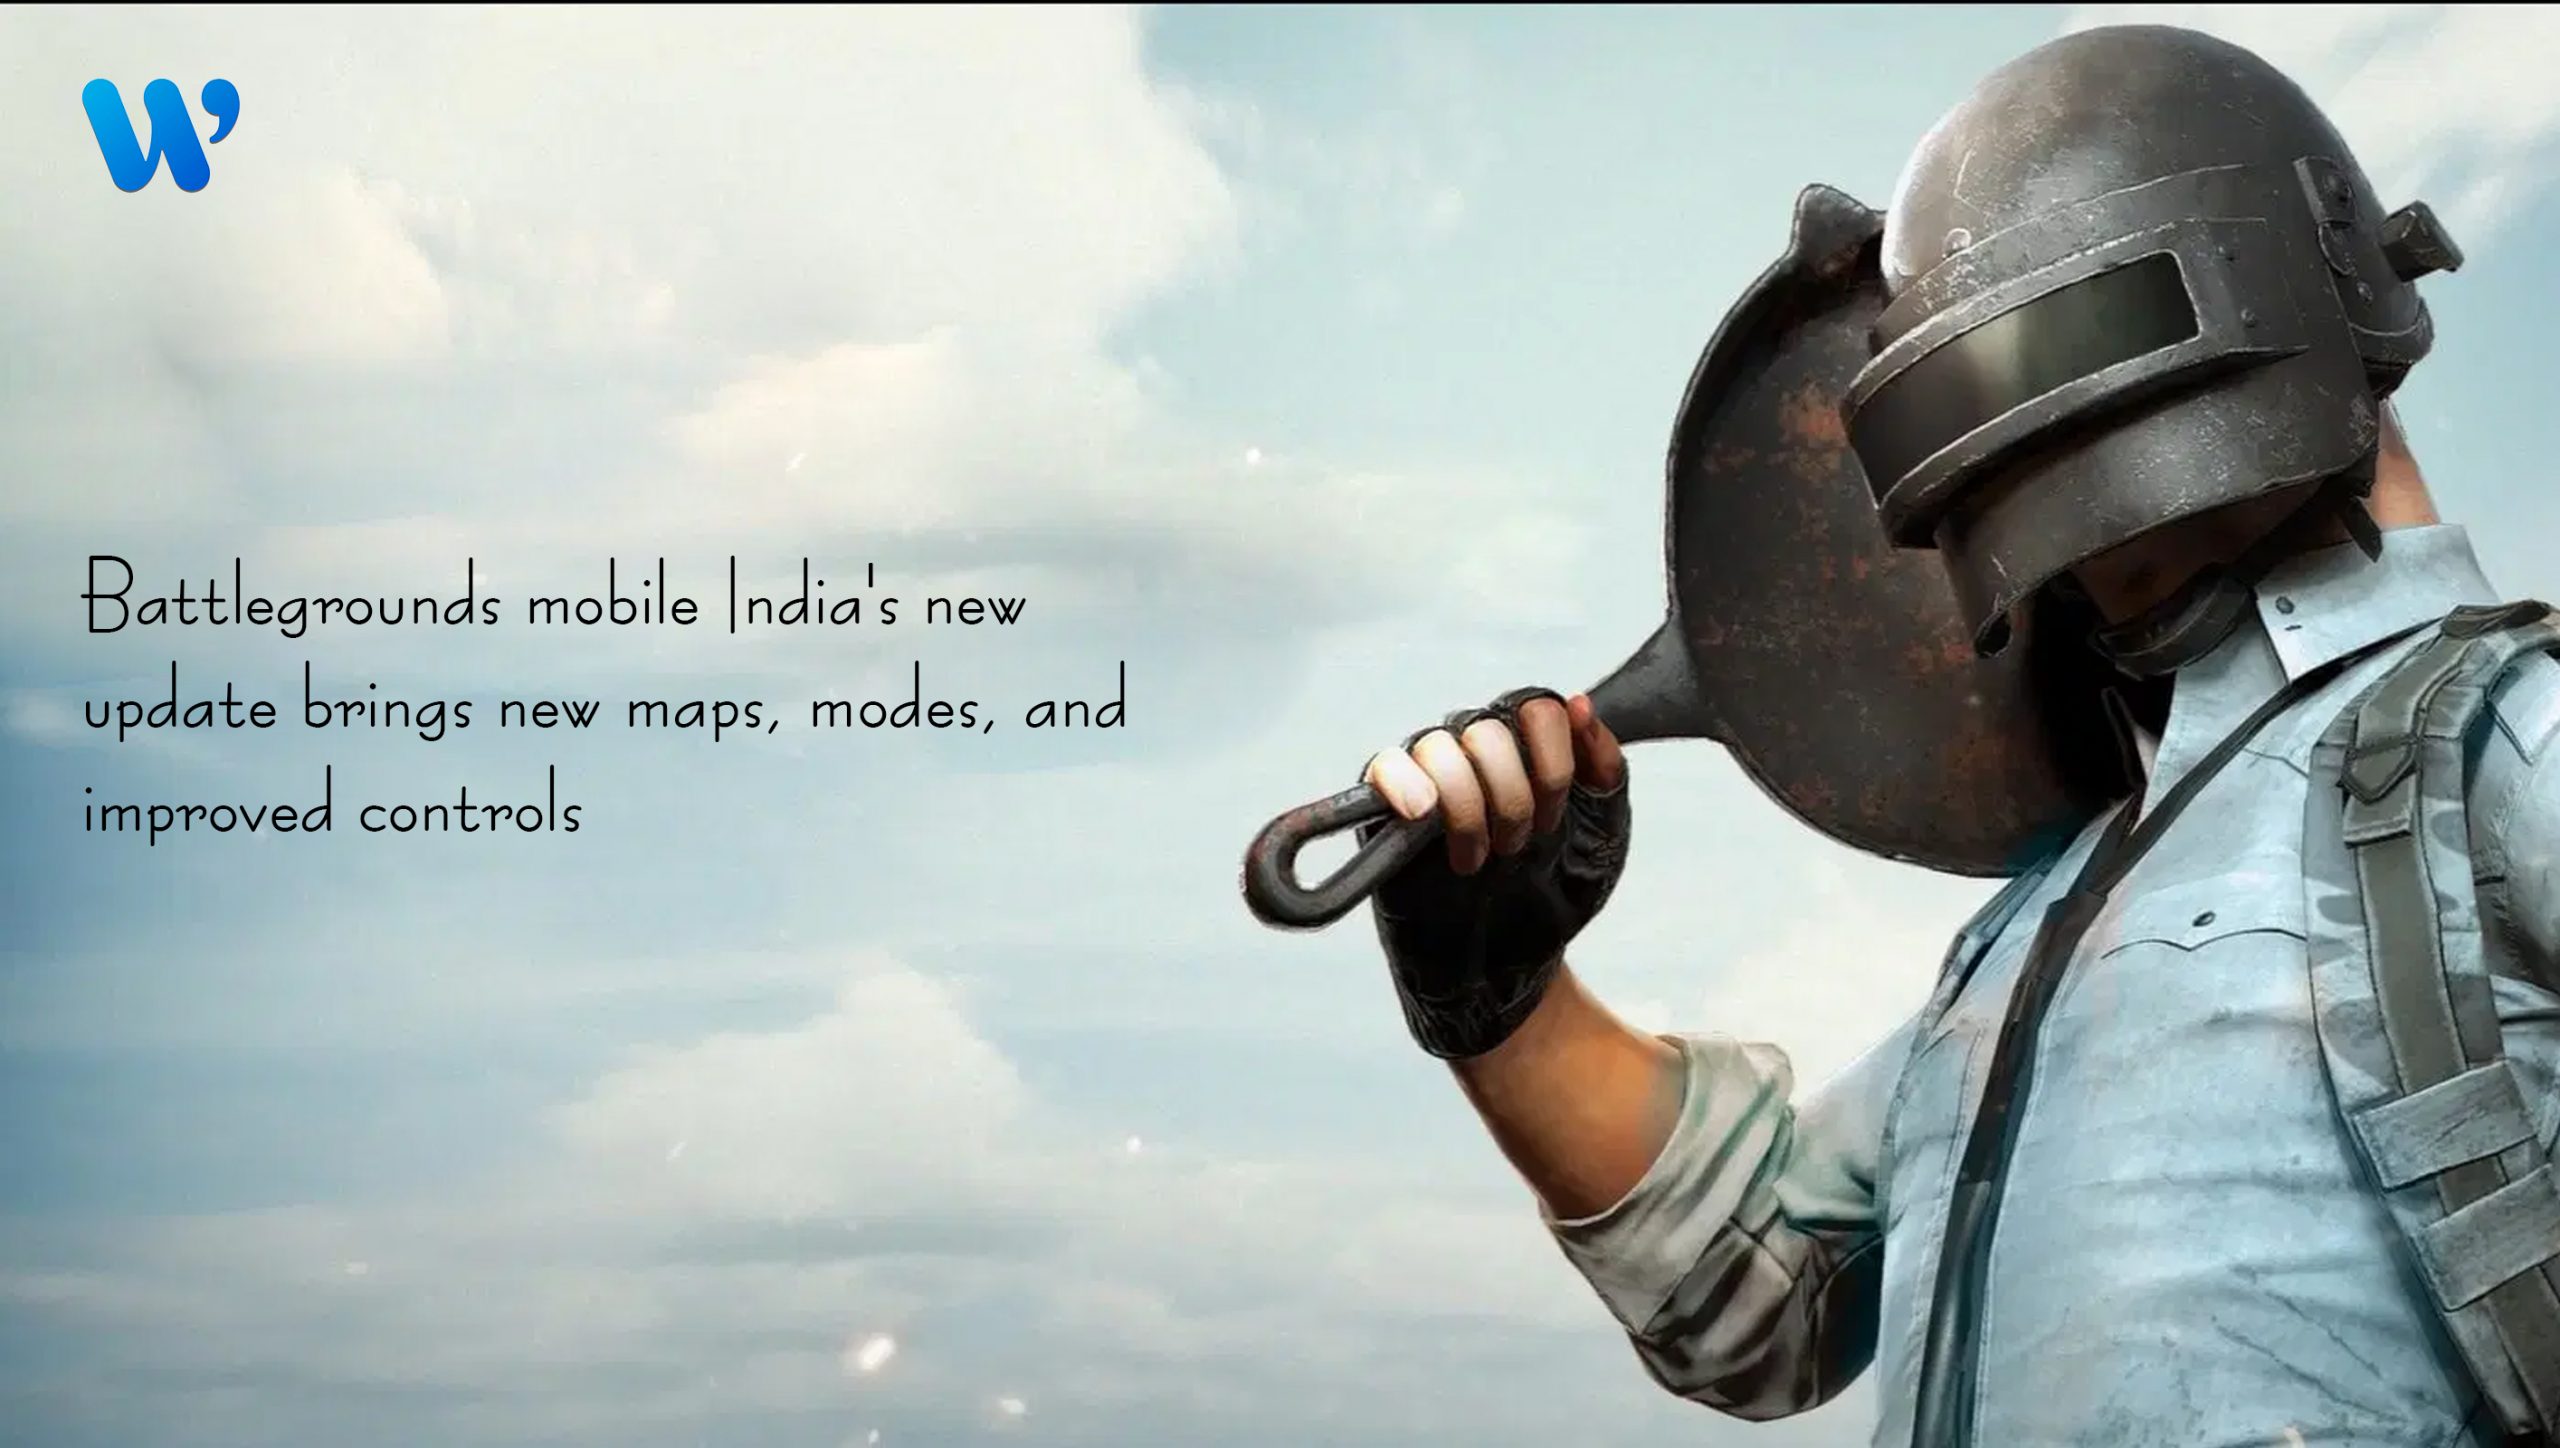 battlegrounds-mobile-indias-new-update-brings-new-maps-modes-and-improved-controls%ef%bf%bc